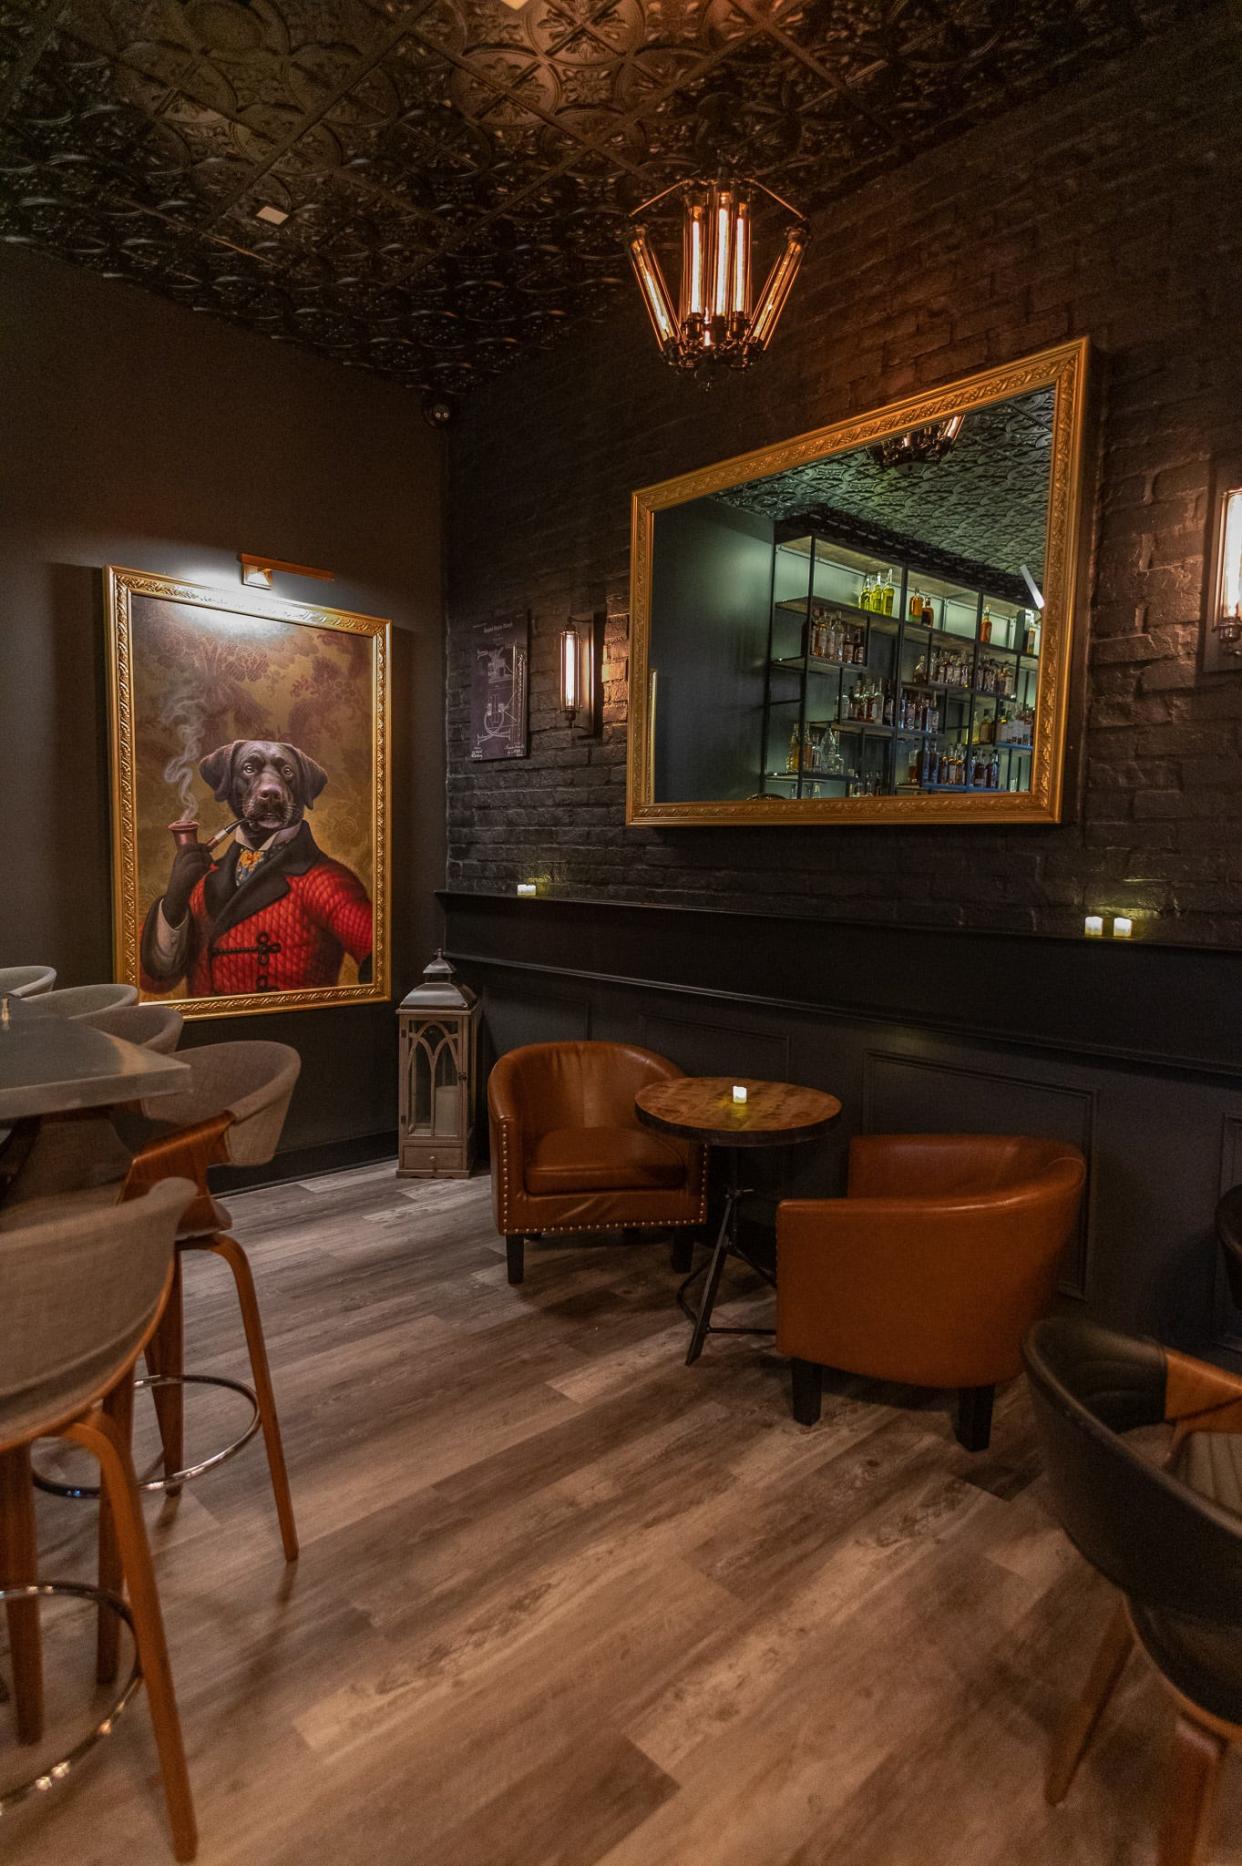 The Watson Speakeasy, in a secret location with a hidden entrance, will open in Cuyahoga Falls Friday.